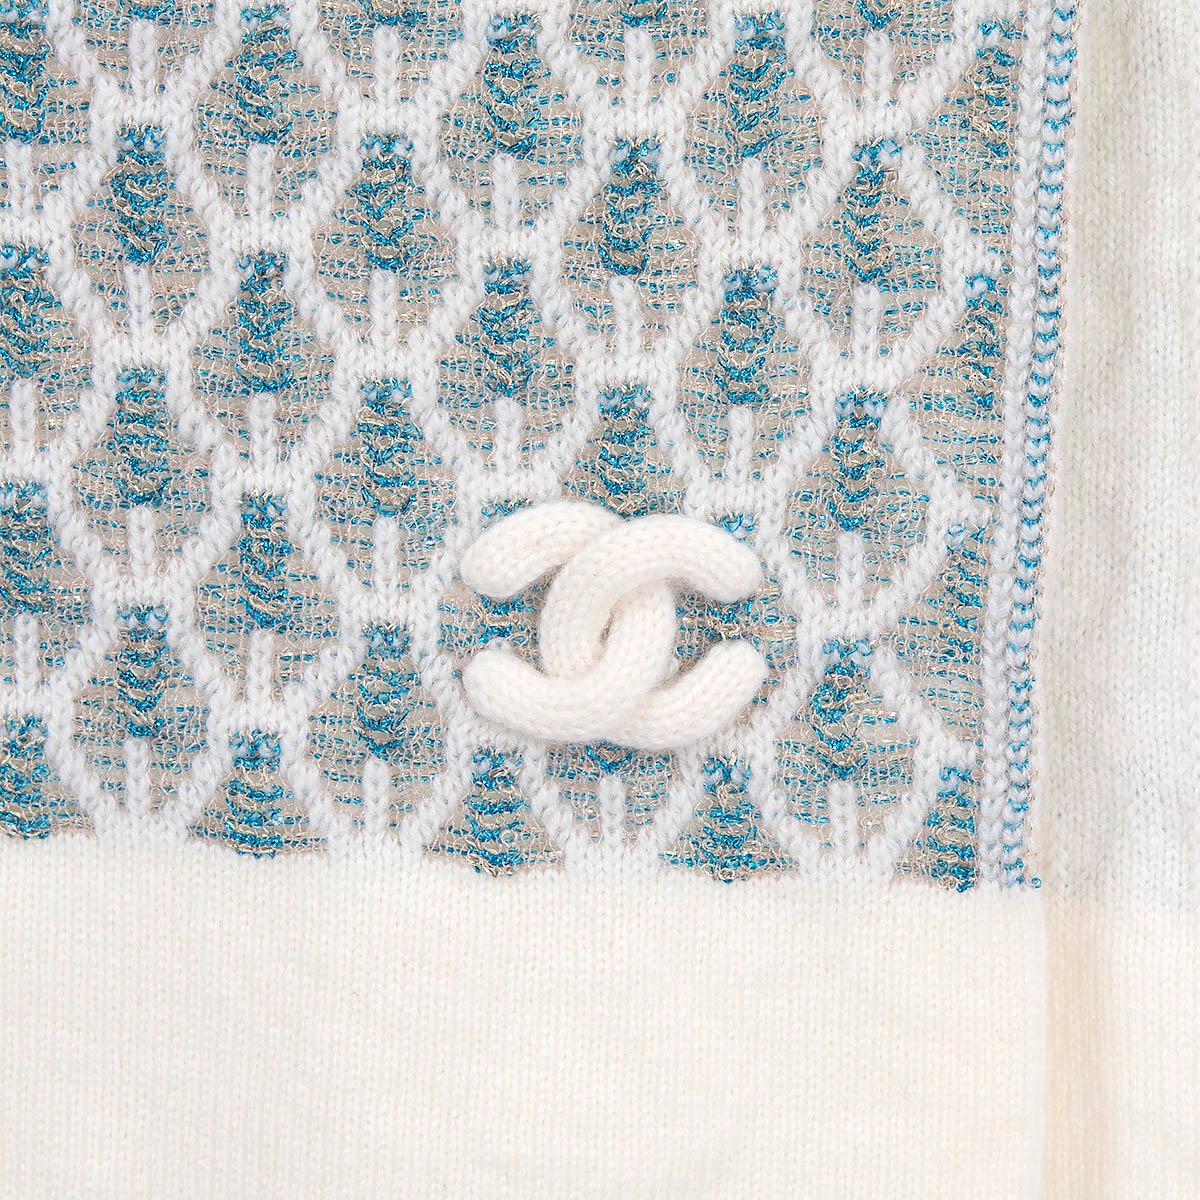 100% authentic Chanel CC shawl in off-white cashmere (94%), viscose (3%), cotton (1%), cupro (1%) and blue metallised fibre (1%). Has been worn once and is in excellent condition. 

Measurements
Width	43cm (16.8in)
Length	190cm (74.1in)

All our